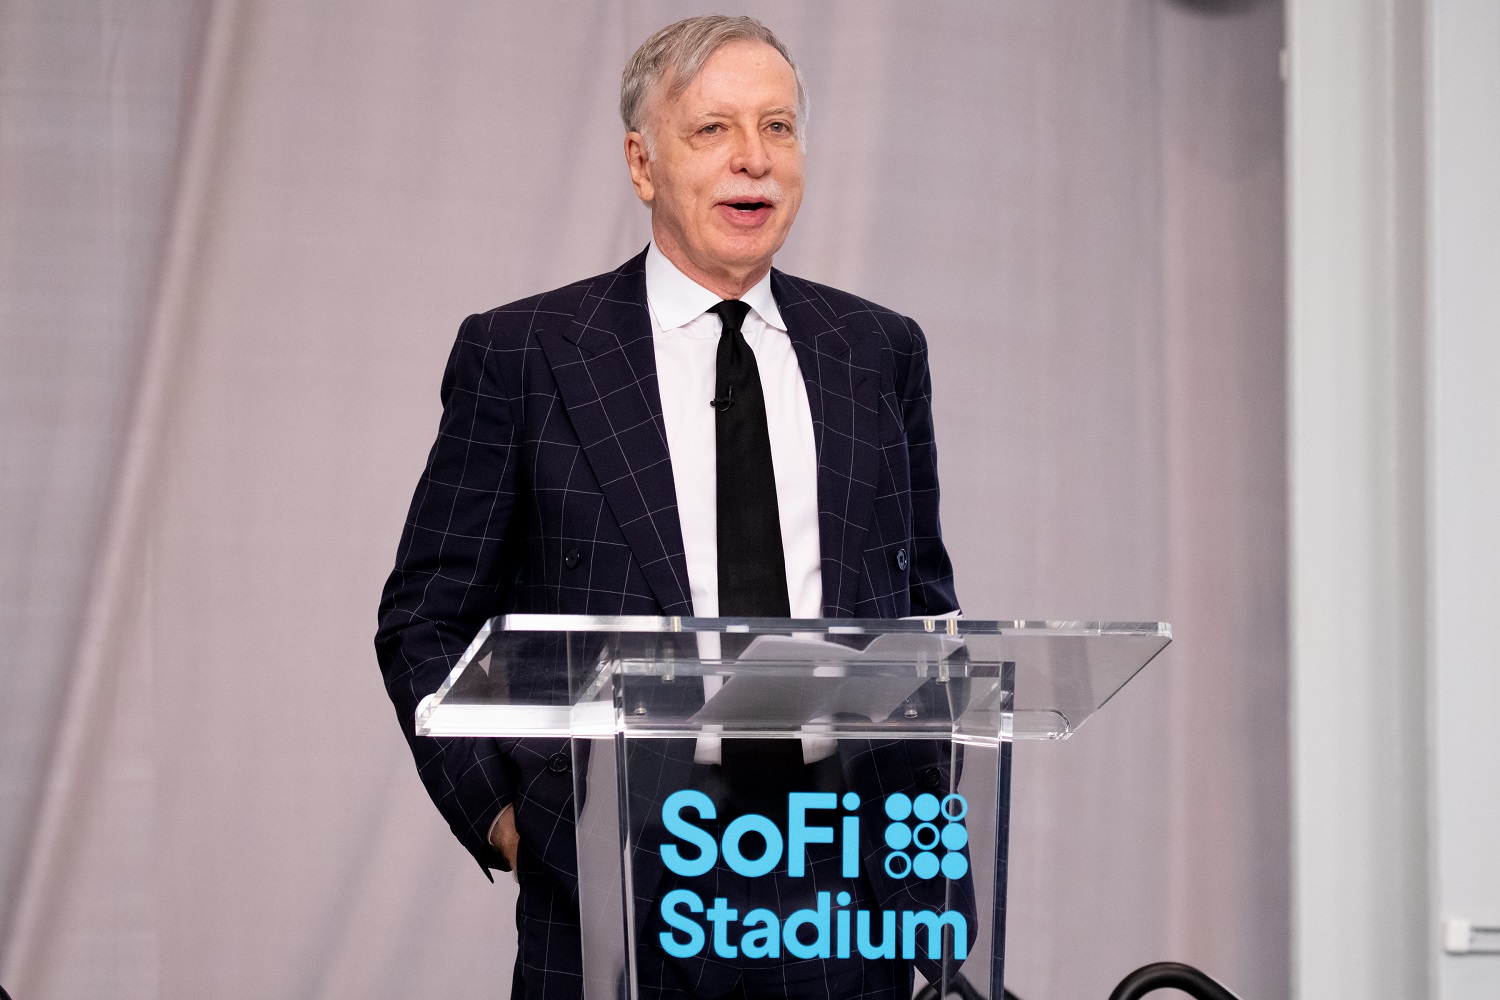 Los Angeles Rams and Arsenal owner Stan Kroenke speaks during the SoFi Stadium ribbon-cutting event on Sept. 8, 2020.